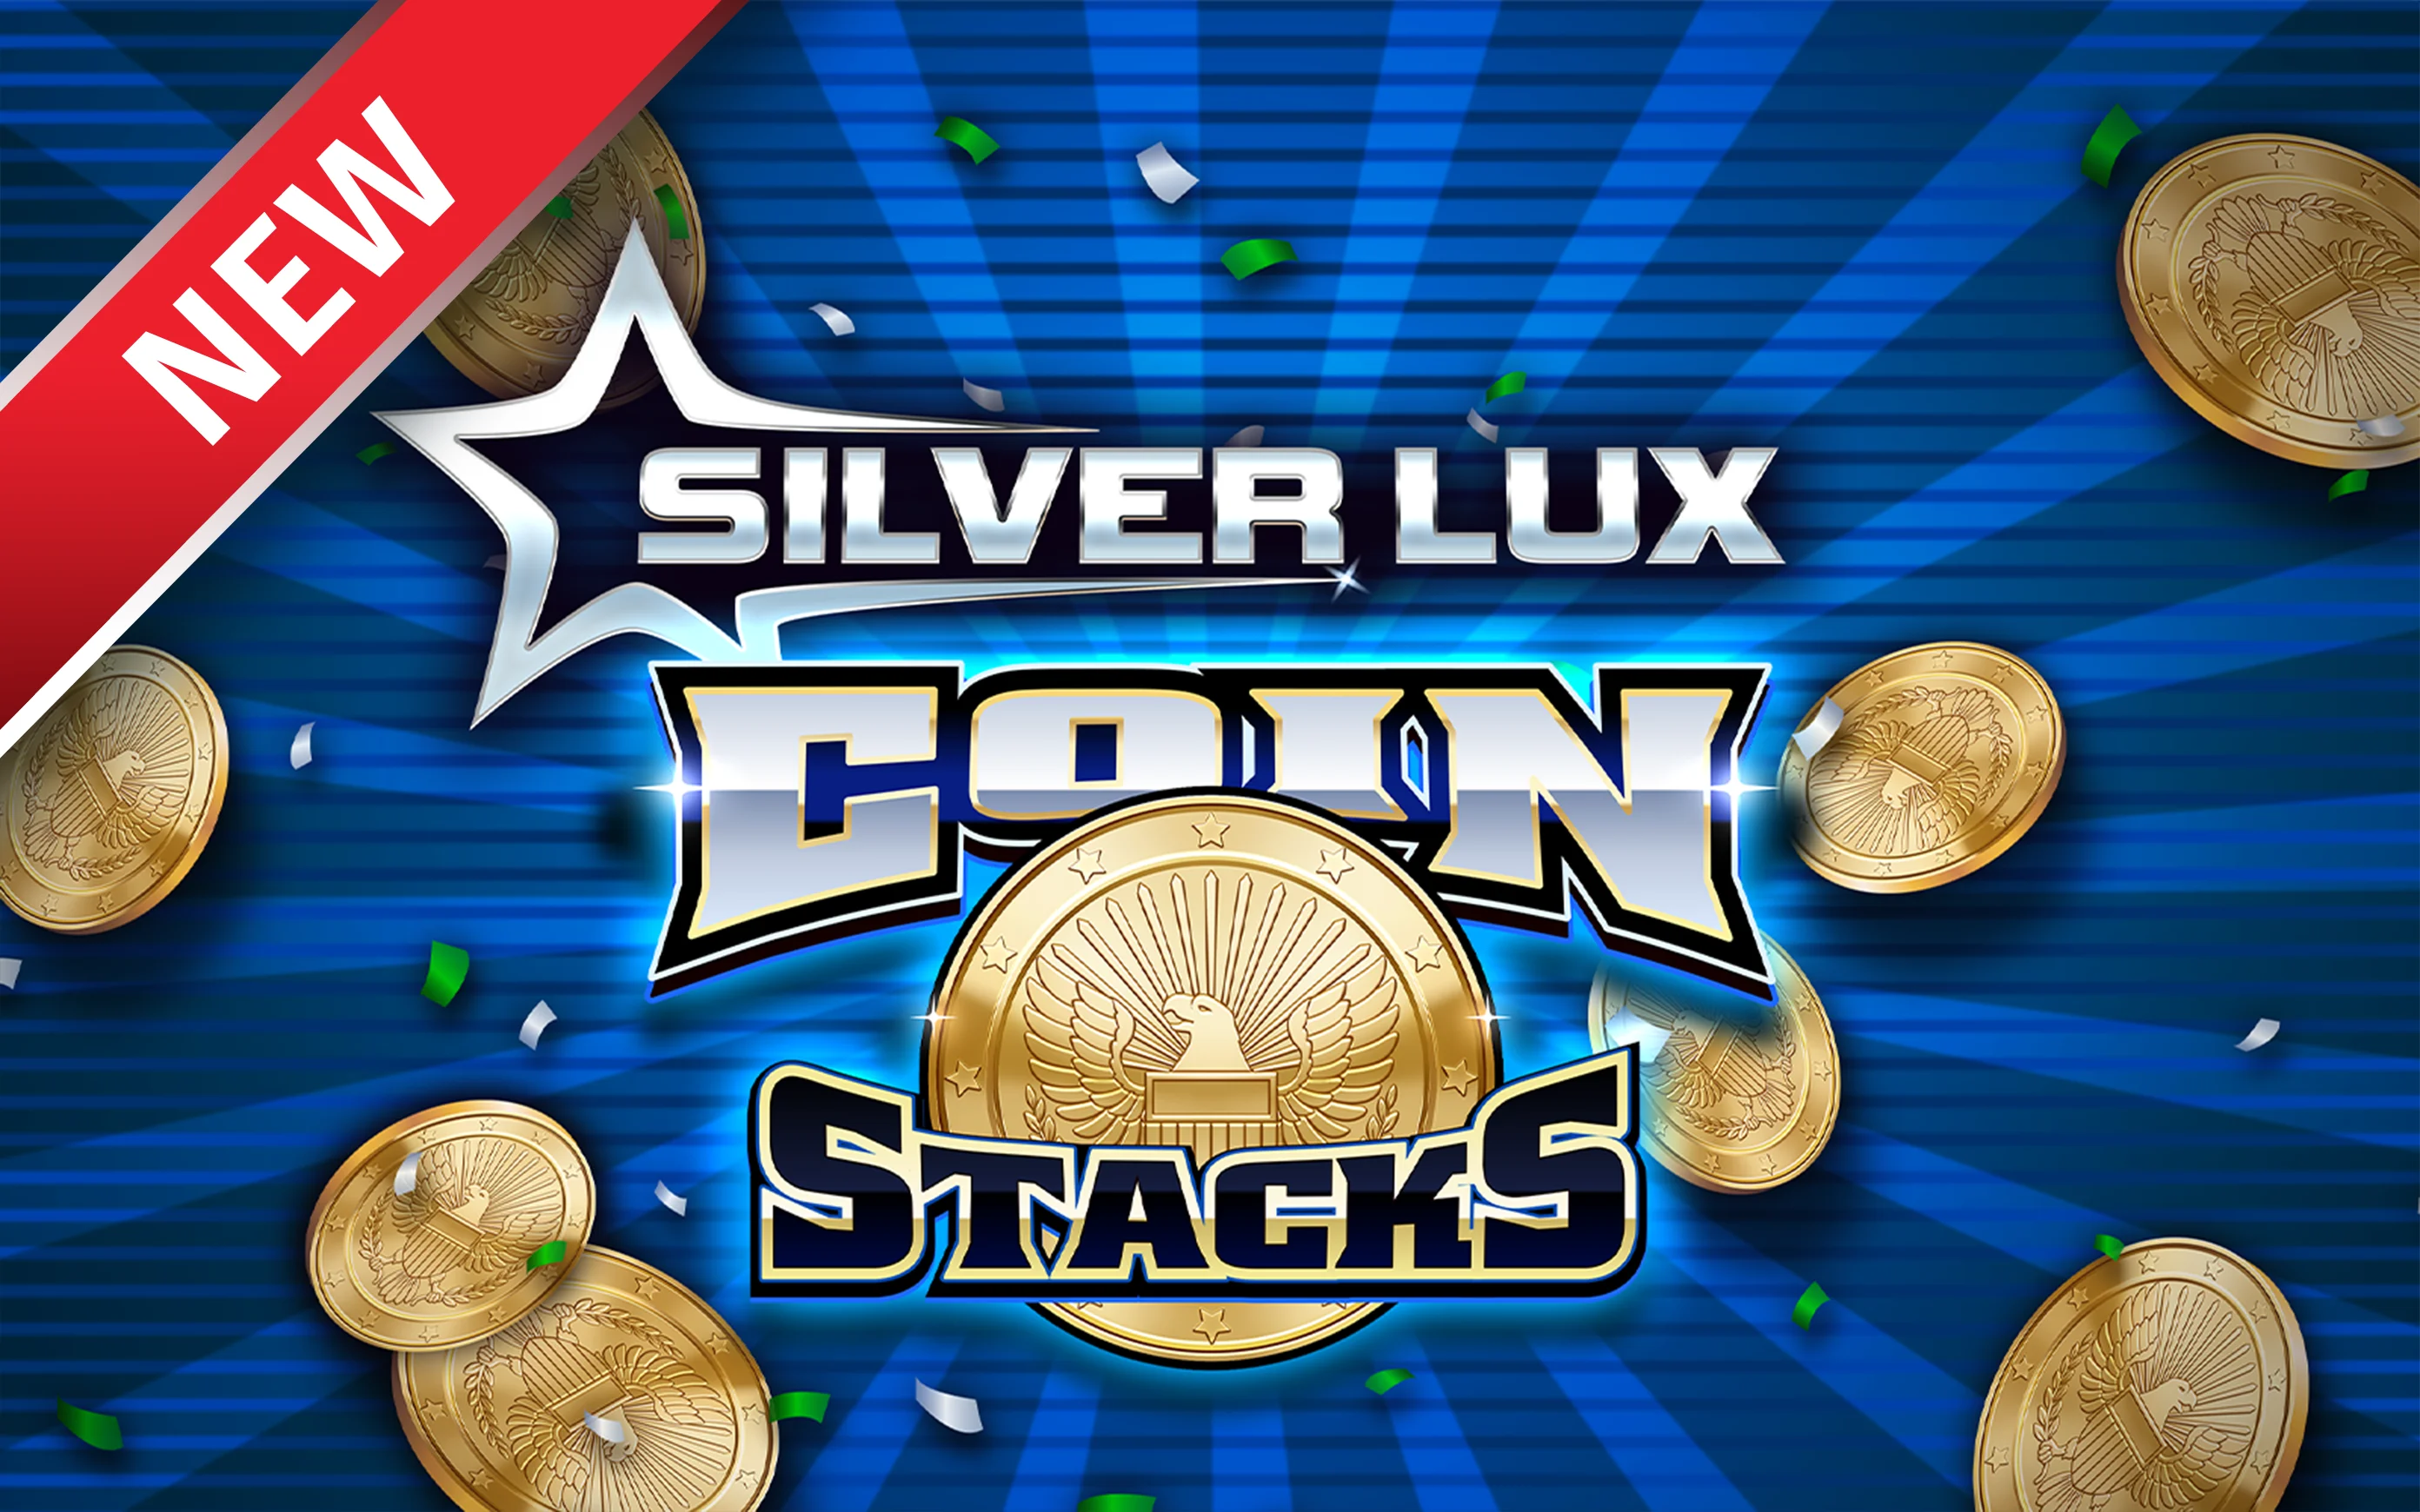 Jogue Silver Lux – Coin Stacks no casino online Starcasino.be 